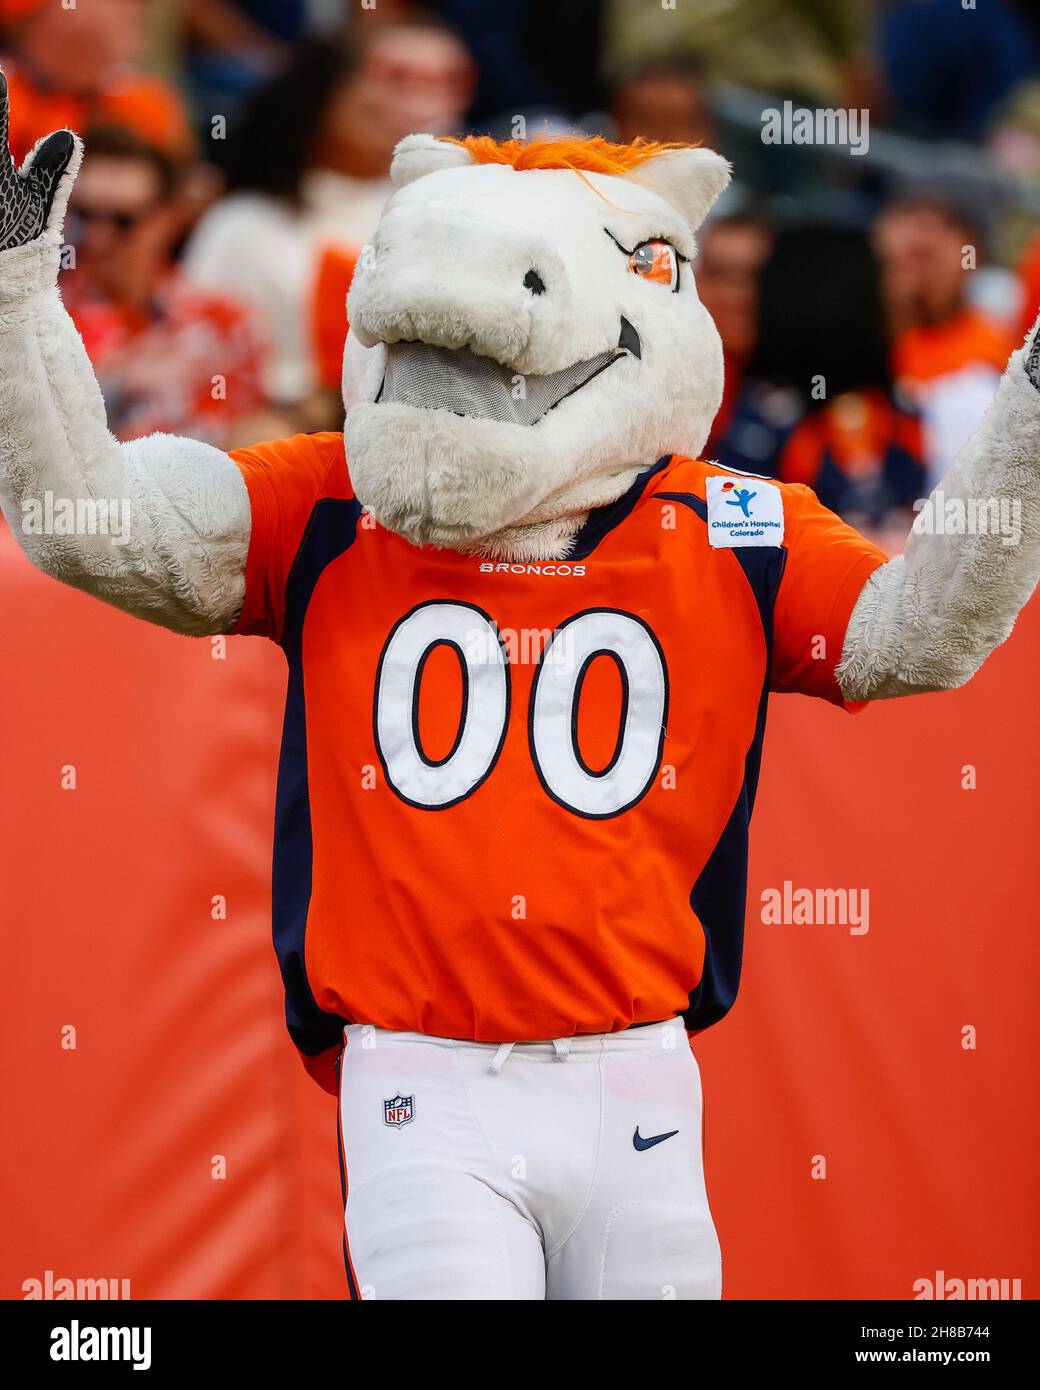 Denver, CO, USA. 28th Nov, 2021. Miles the Denver Broncos mascot patrols the sideline in the first half of the football game between the Denver Broncos and Los Angeles Chargers at Empower Field Field in Denver, CO. Derek Regensburger/CSM/Alamy Live News Stock Photo